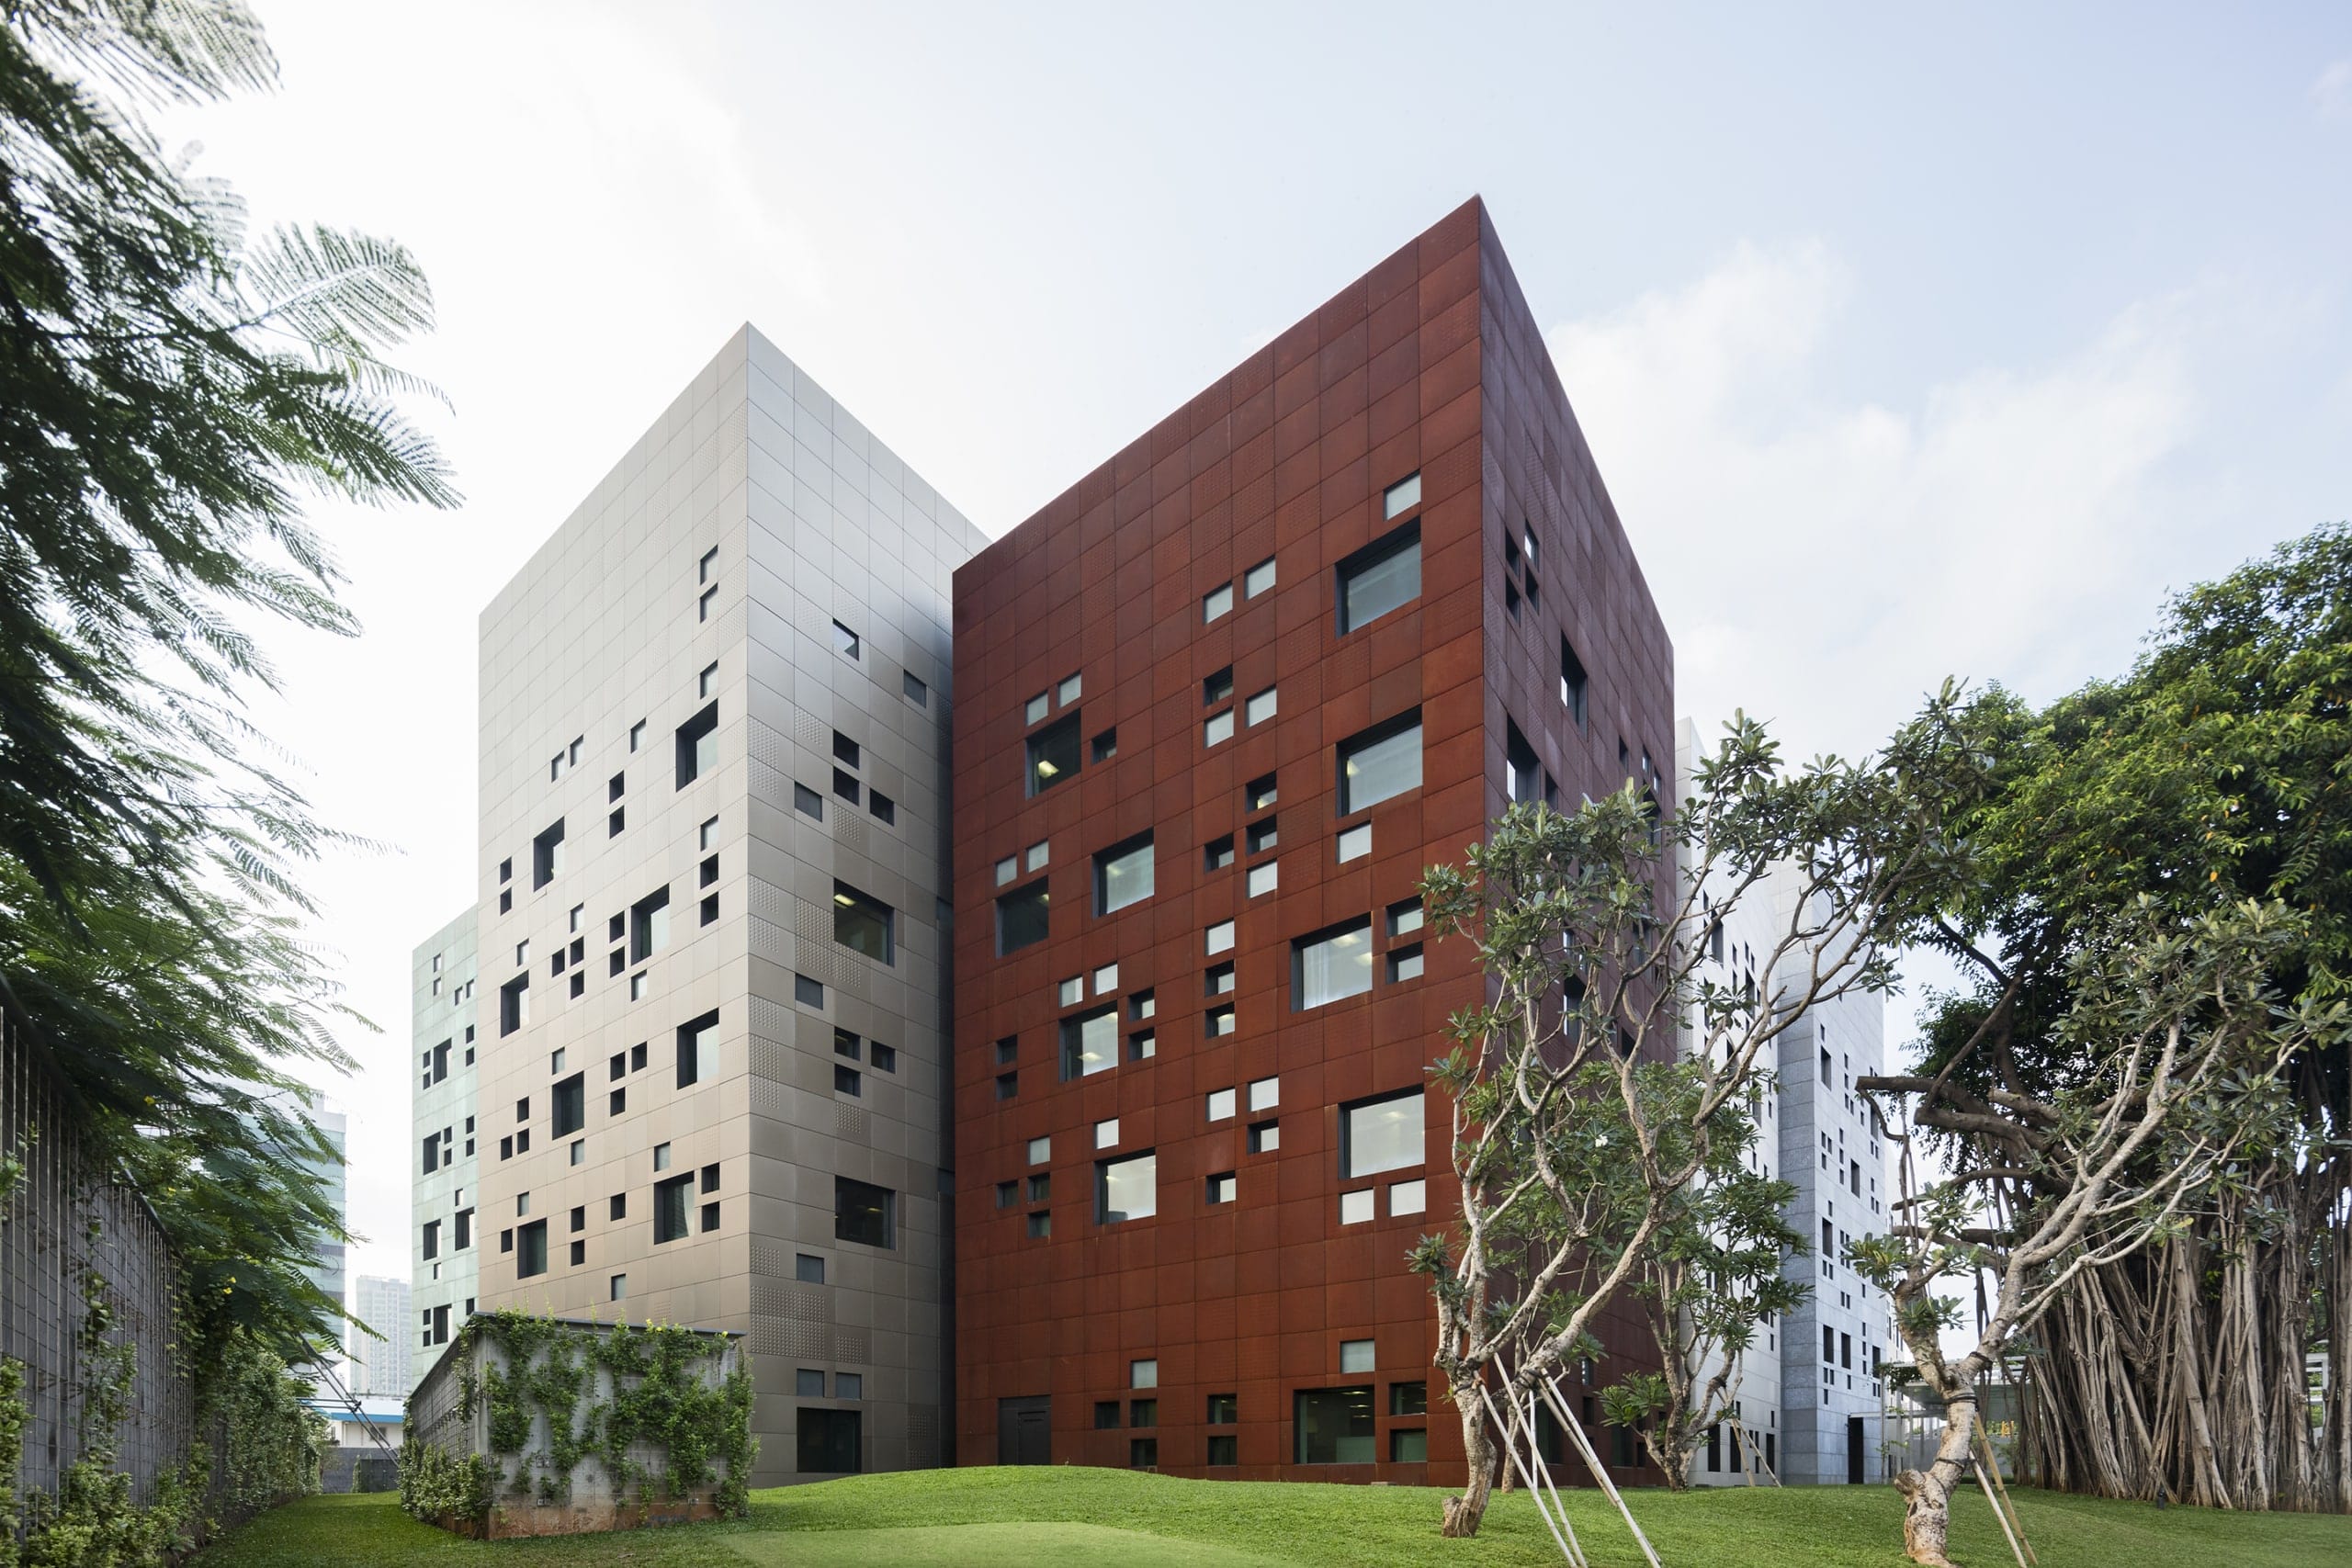 The Australian Embassy in Jakarta features a variety of metal surfaces.